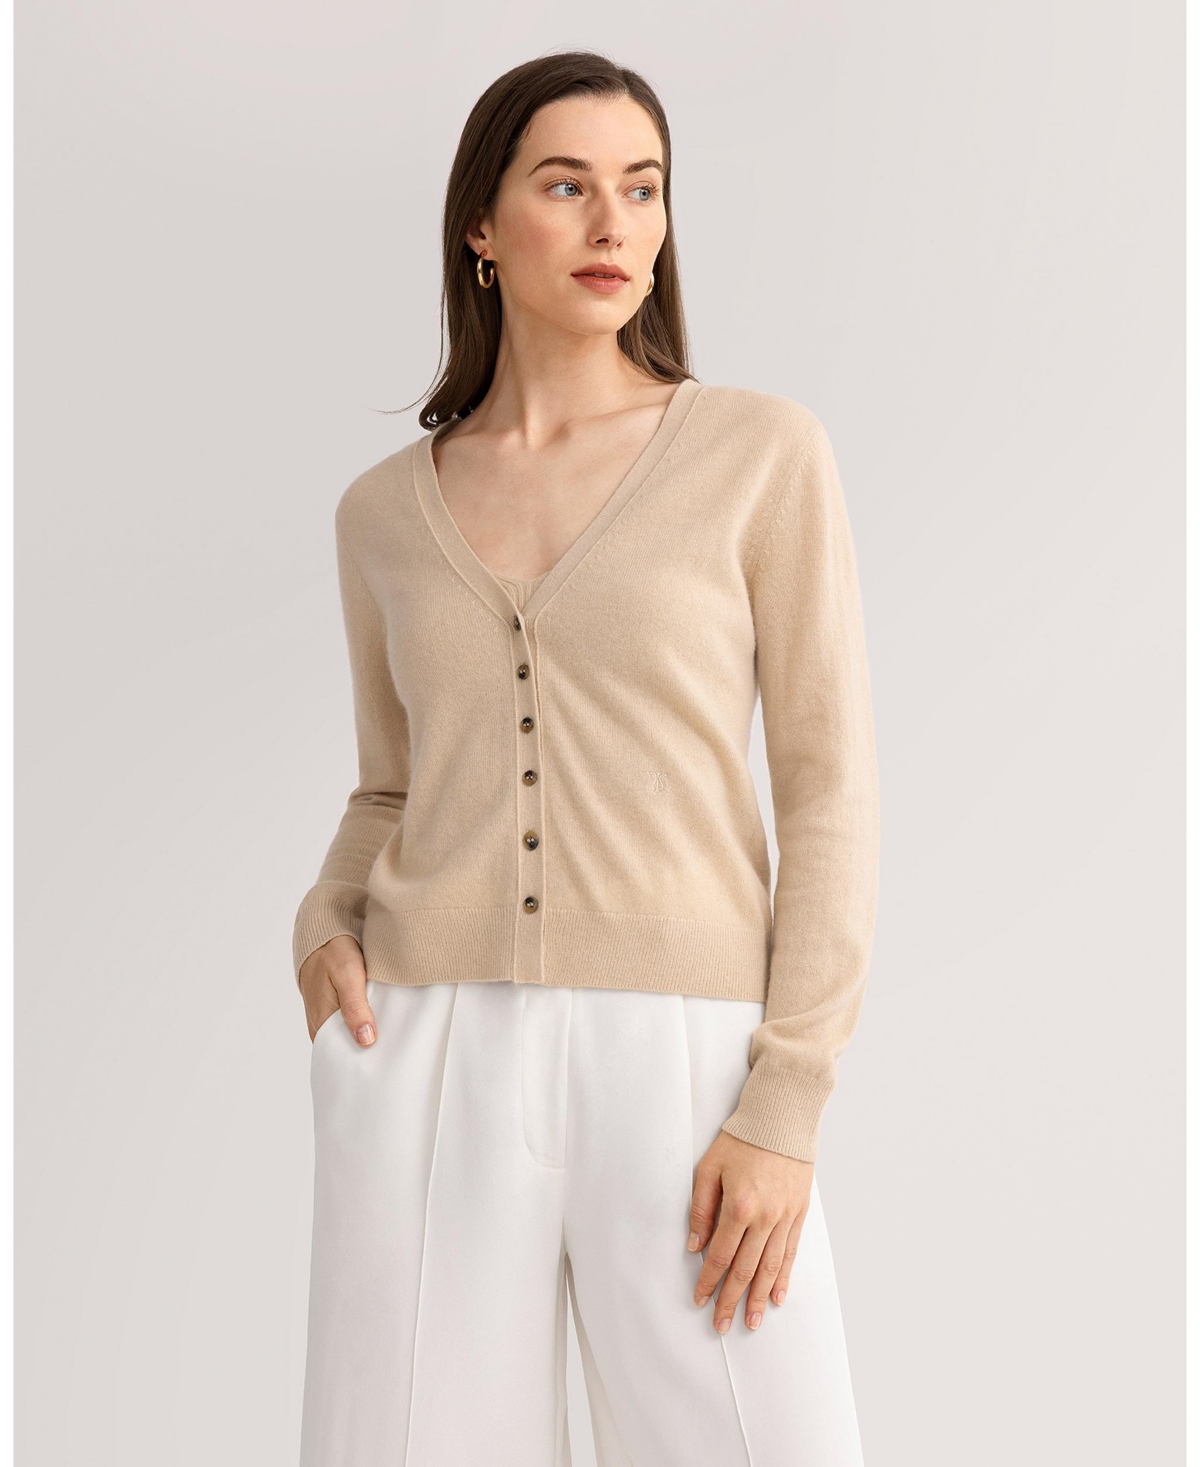 Lilysilk Cashmere Knitted V-neck Cardigan For Women In Neutral